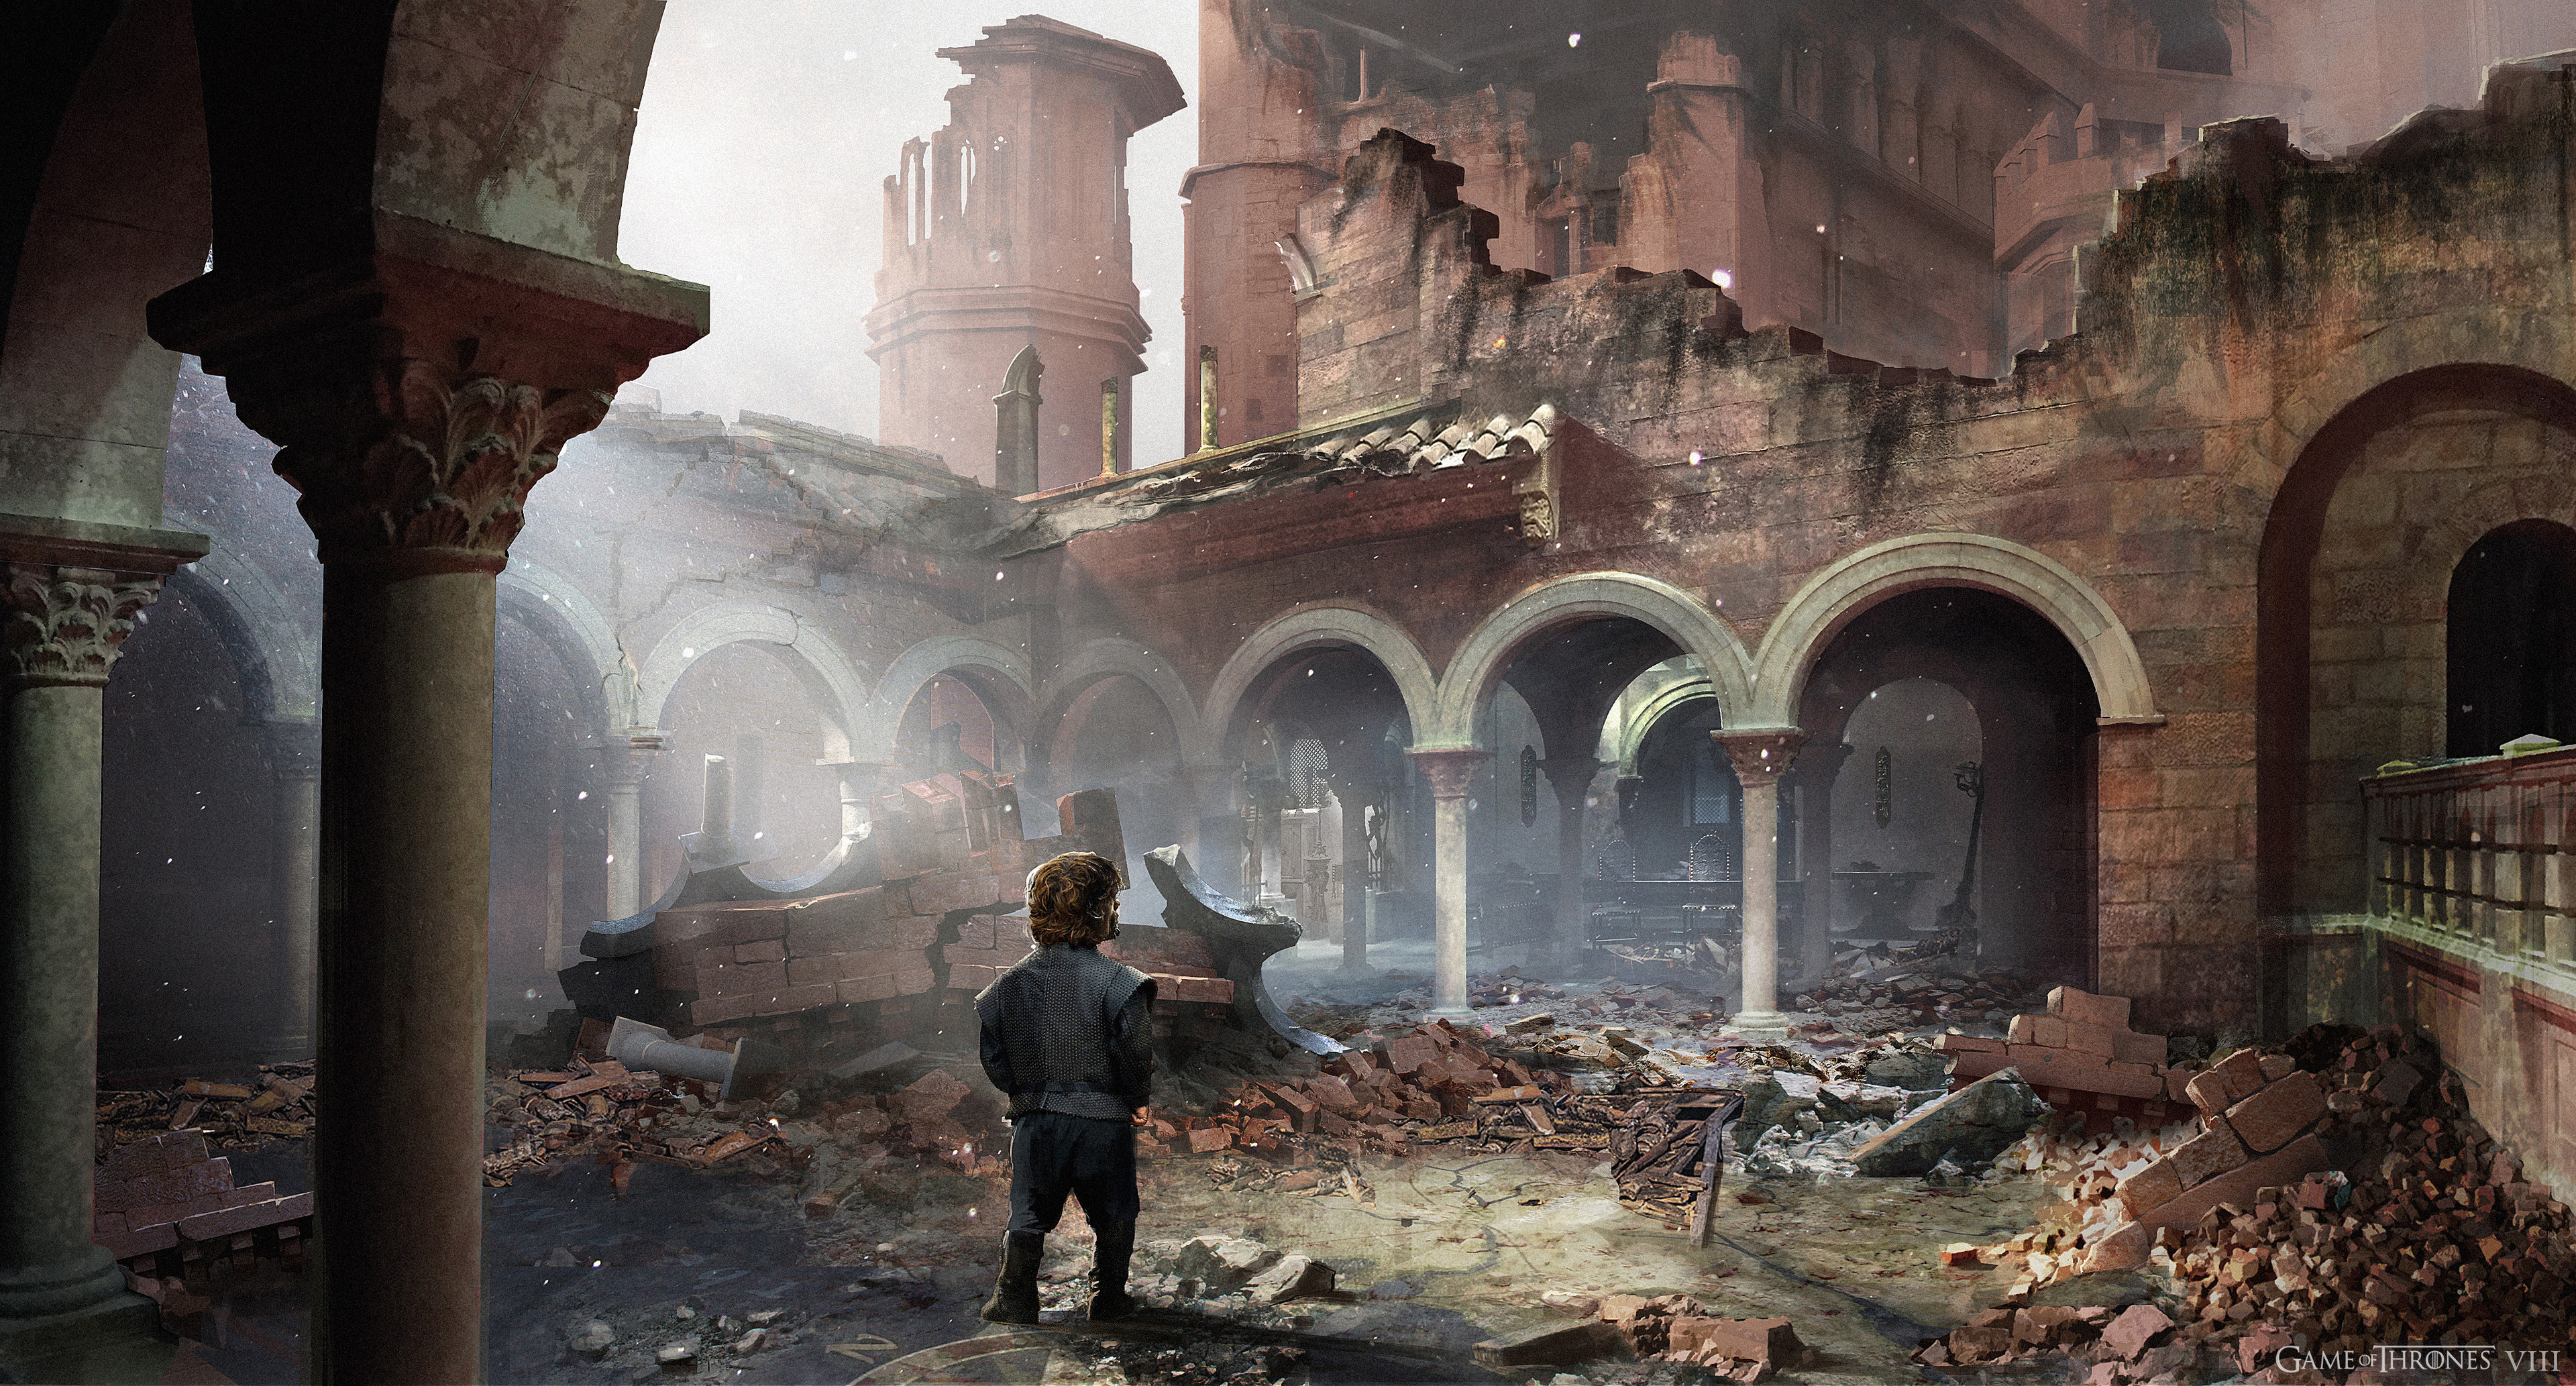 Tyrion on his search for his siblings walks over the ruined map